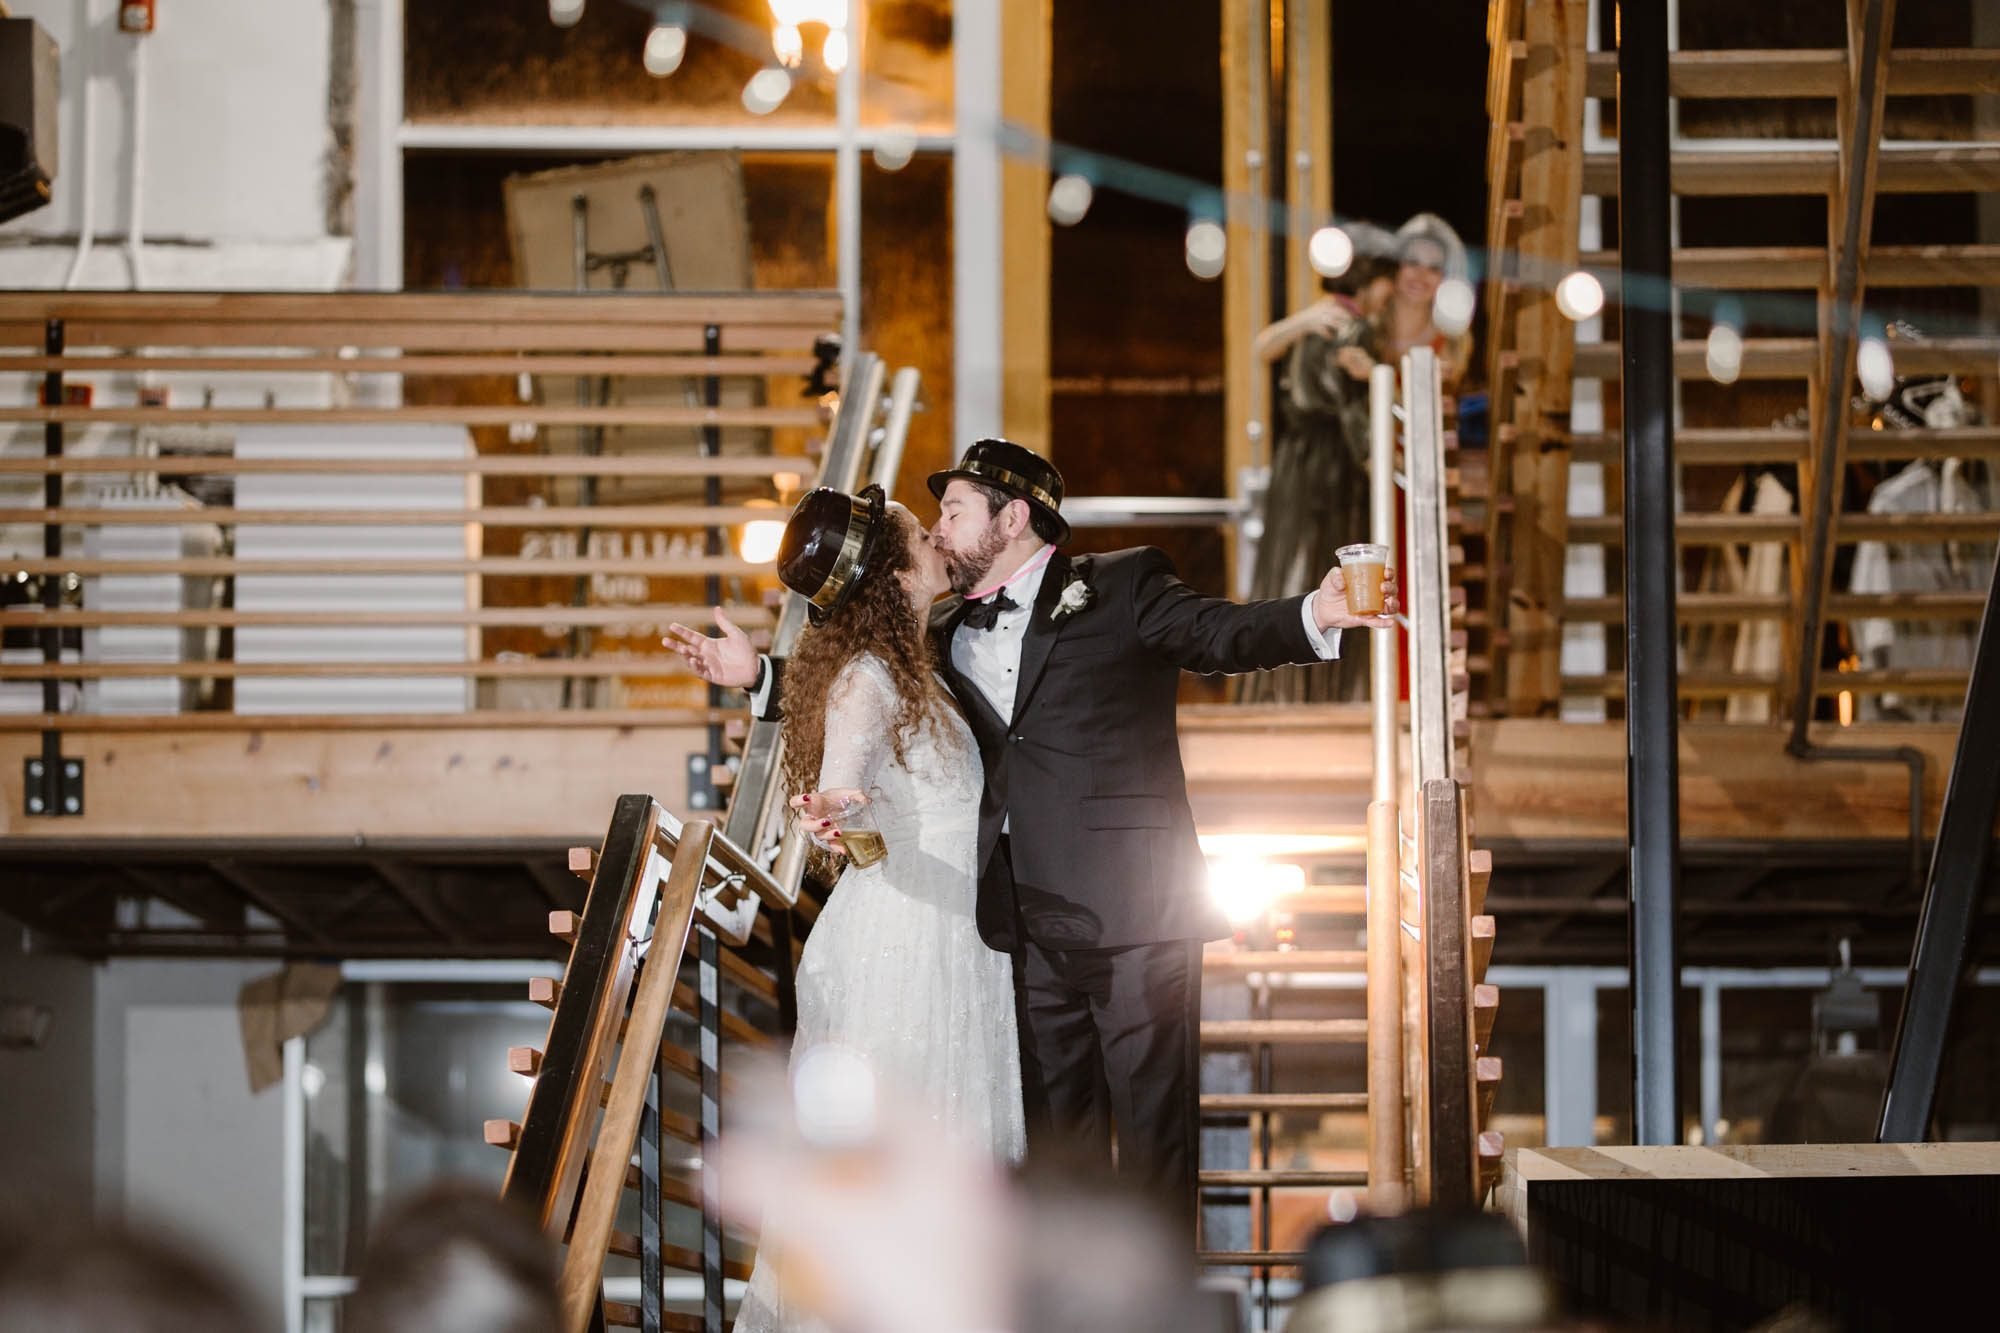 The Emporium Center Wedding in Downtown Knoxville